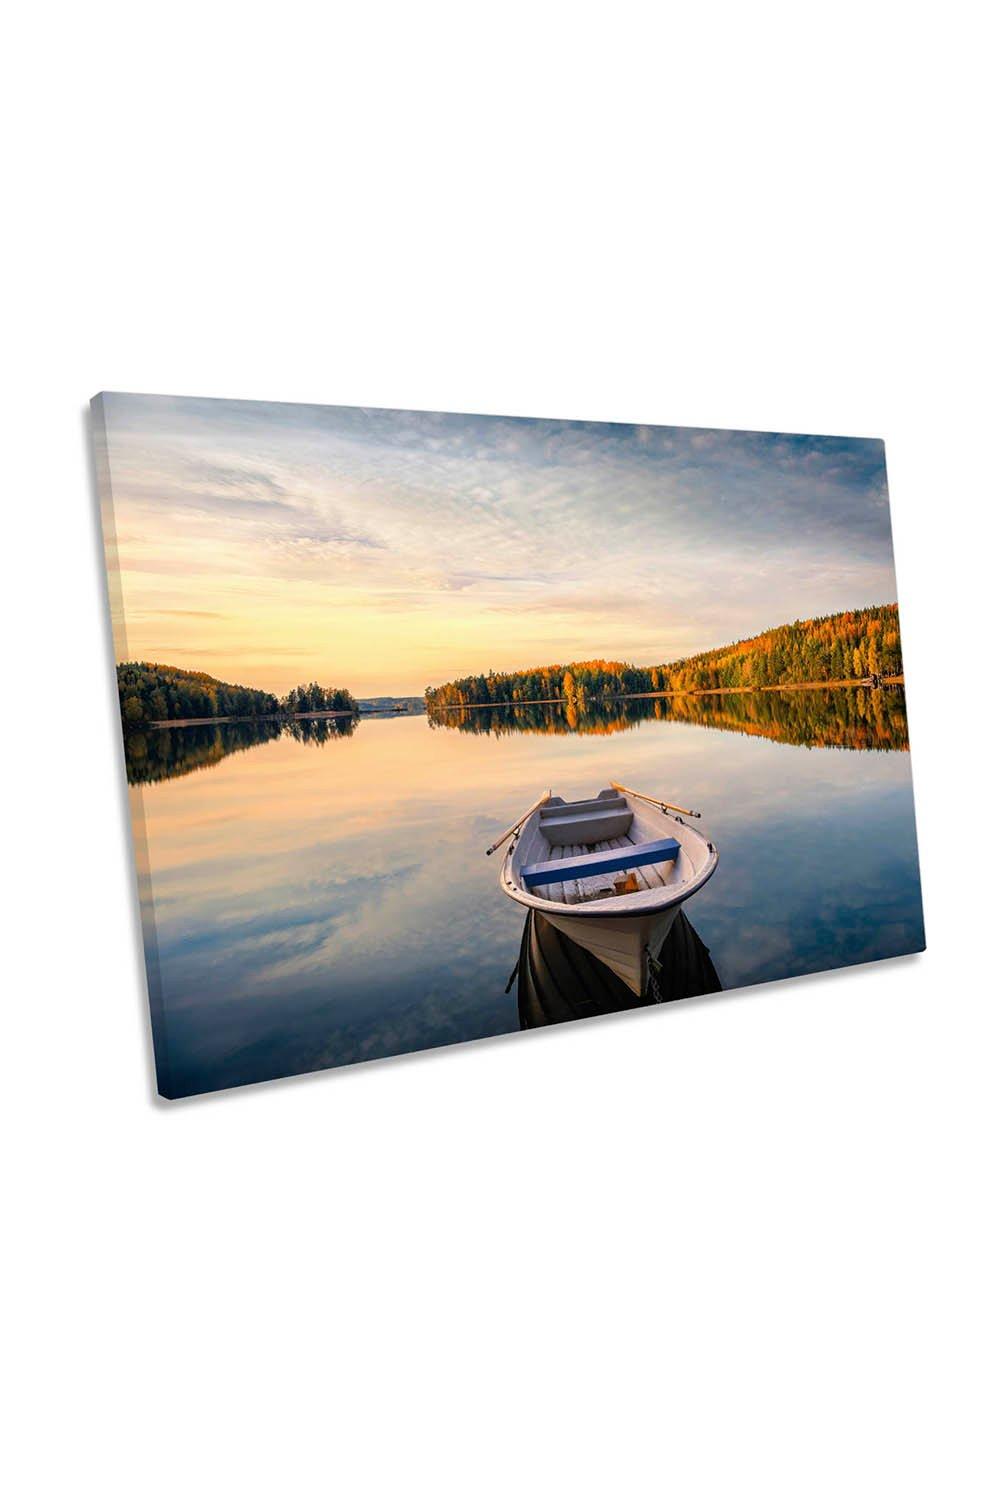 Evening at the Autumn Lake Calm Canvas Wall Art Picture Print